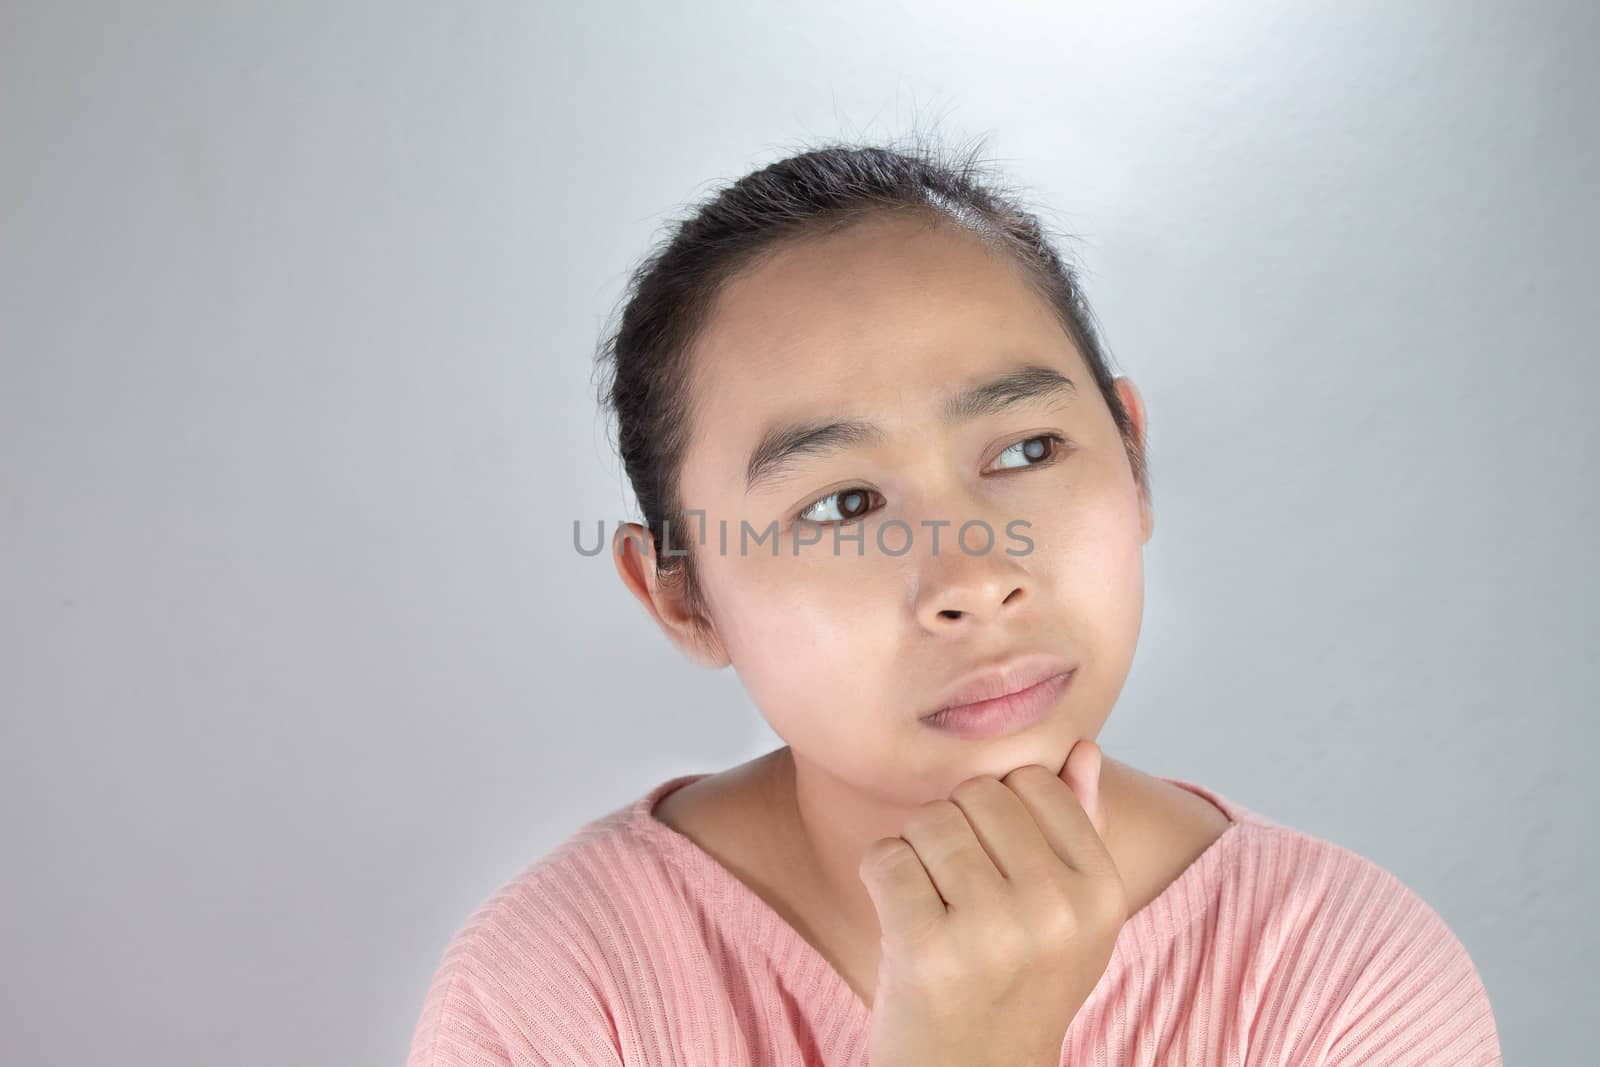 Portrait Thinking face of Asian young woman in pink shirt with hand on chin on grey background.